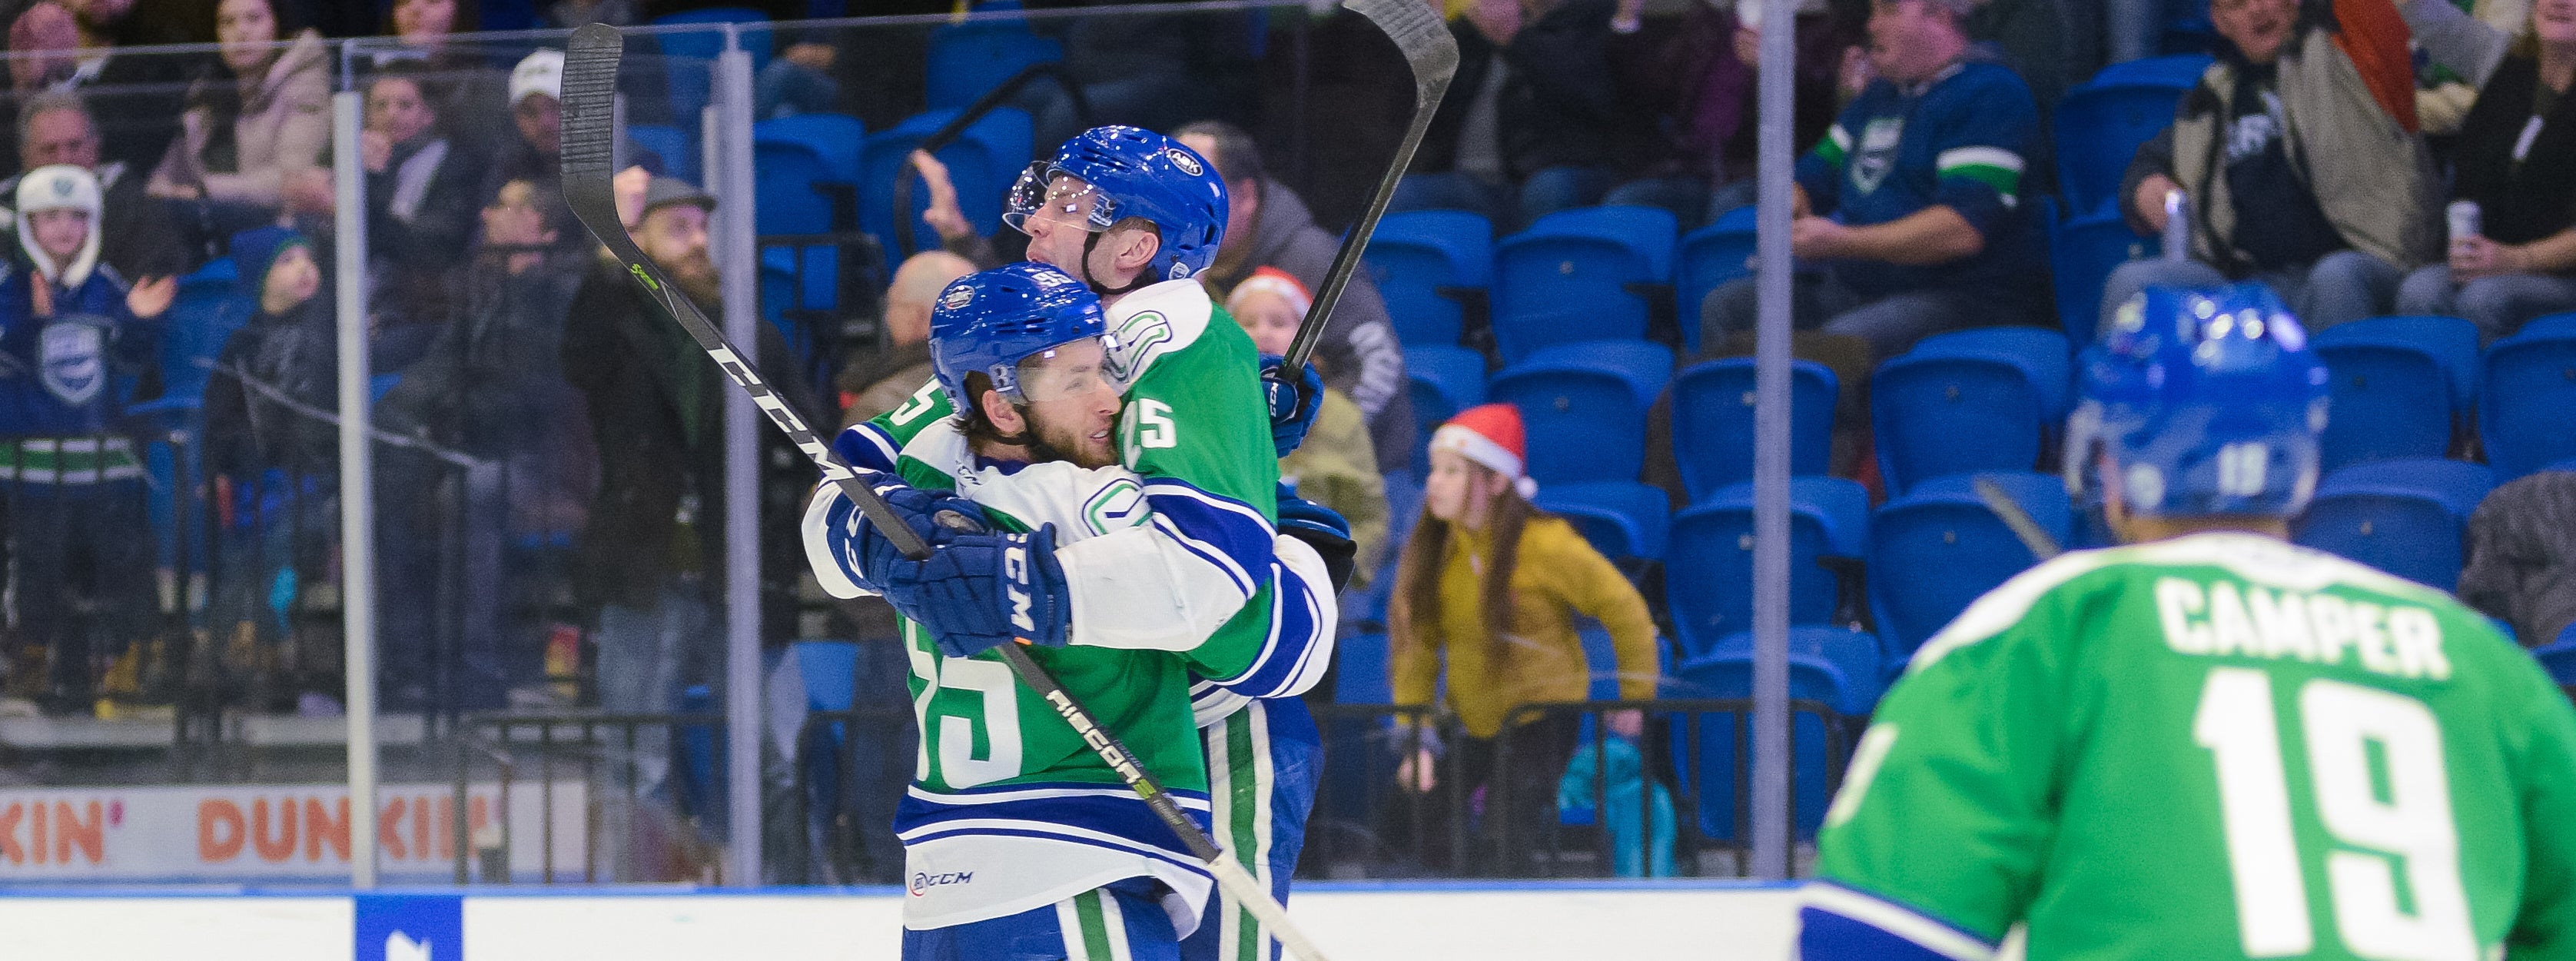 RAFFERTY, POWER PLAY PUSH COMETS TO VICTORY OVER LAVAL